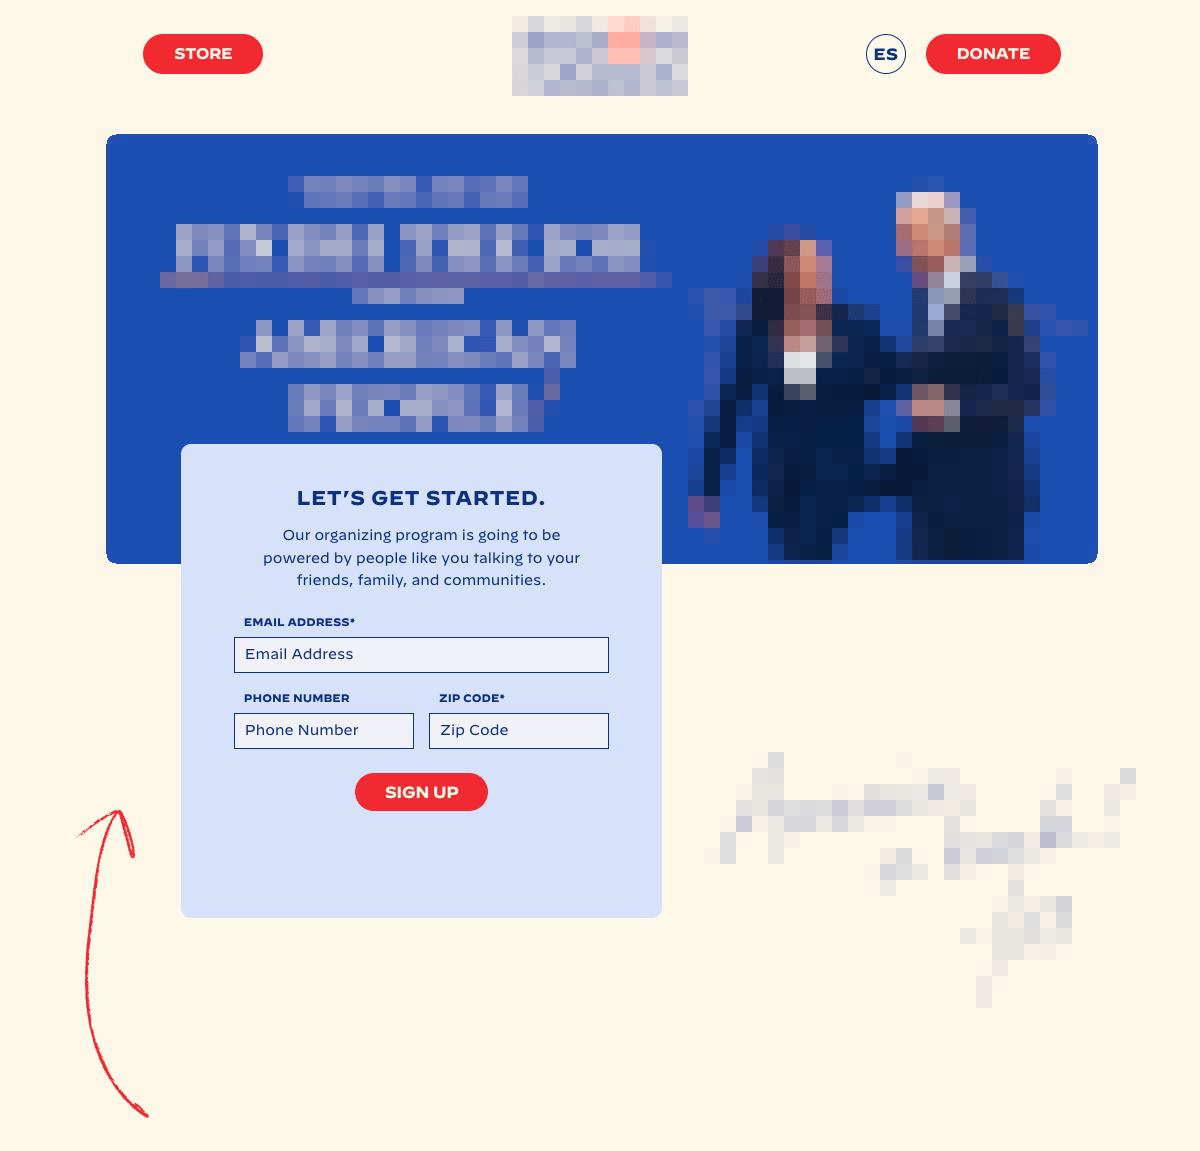 A certain politician's home page with details obscured